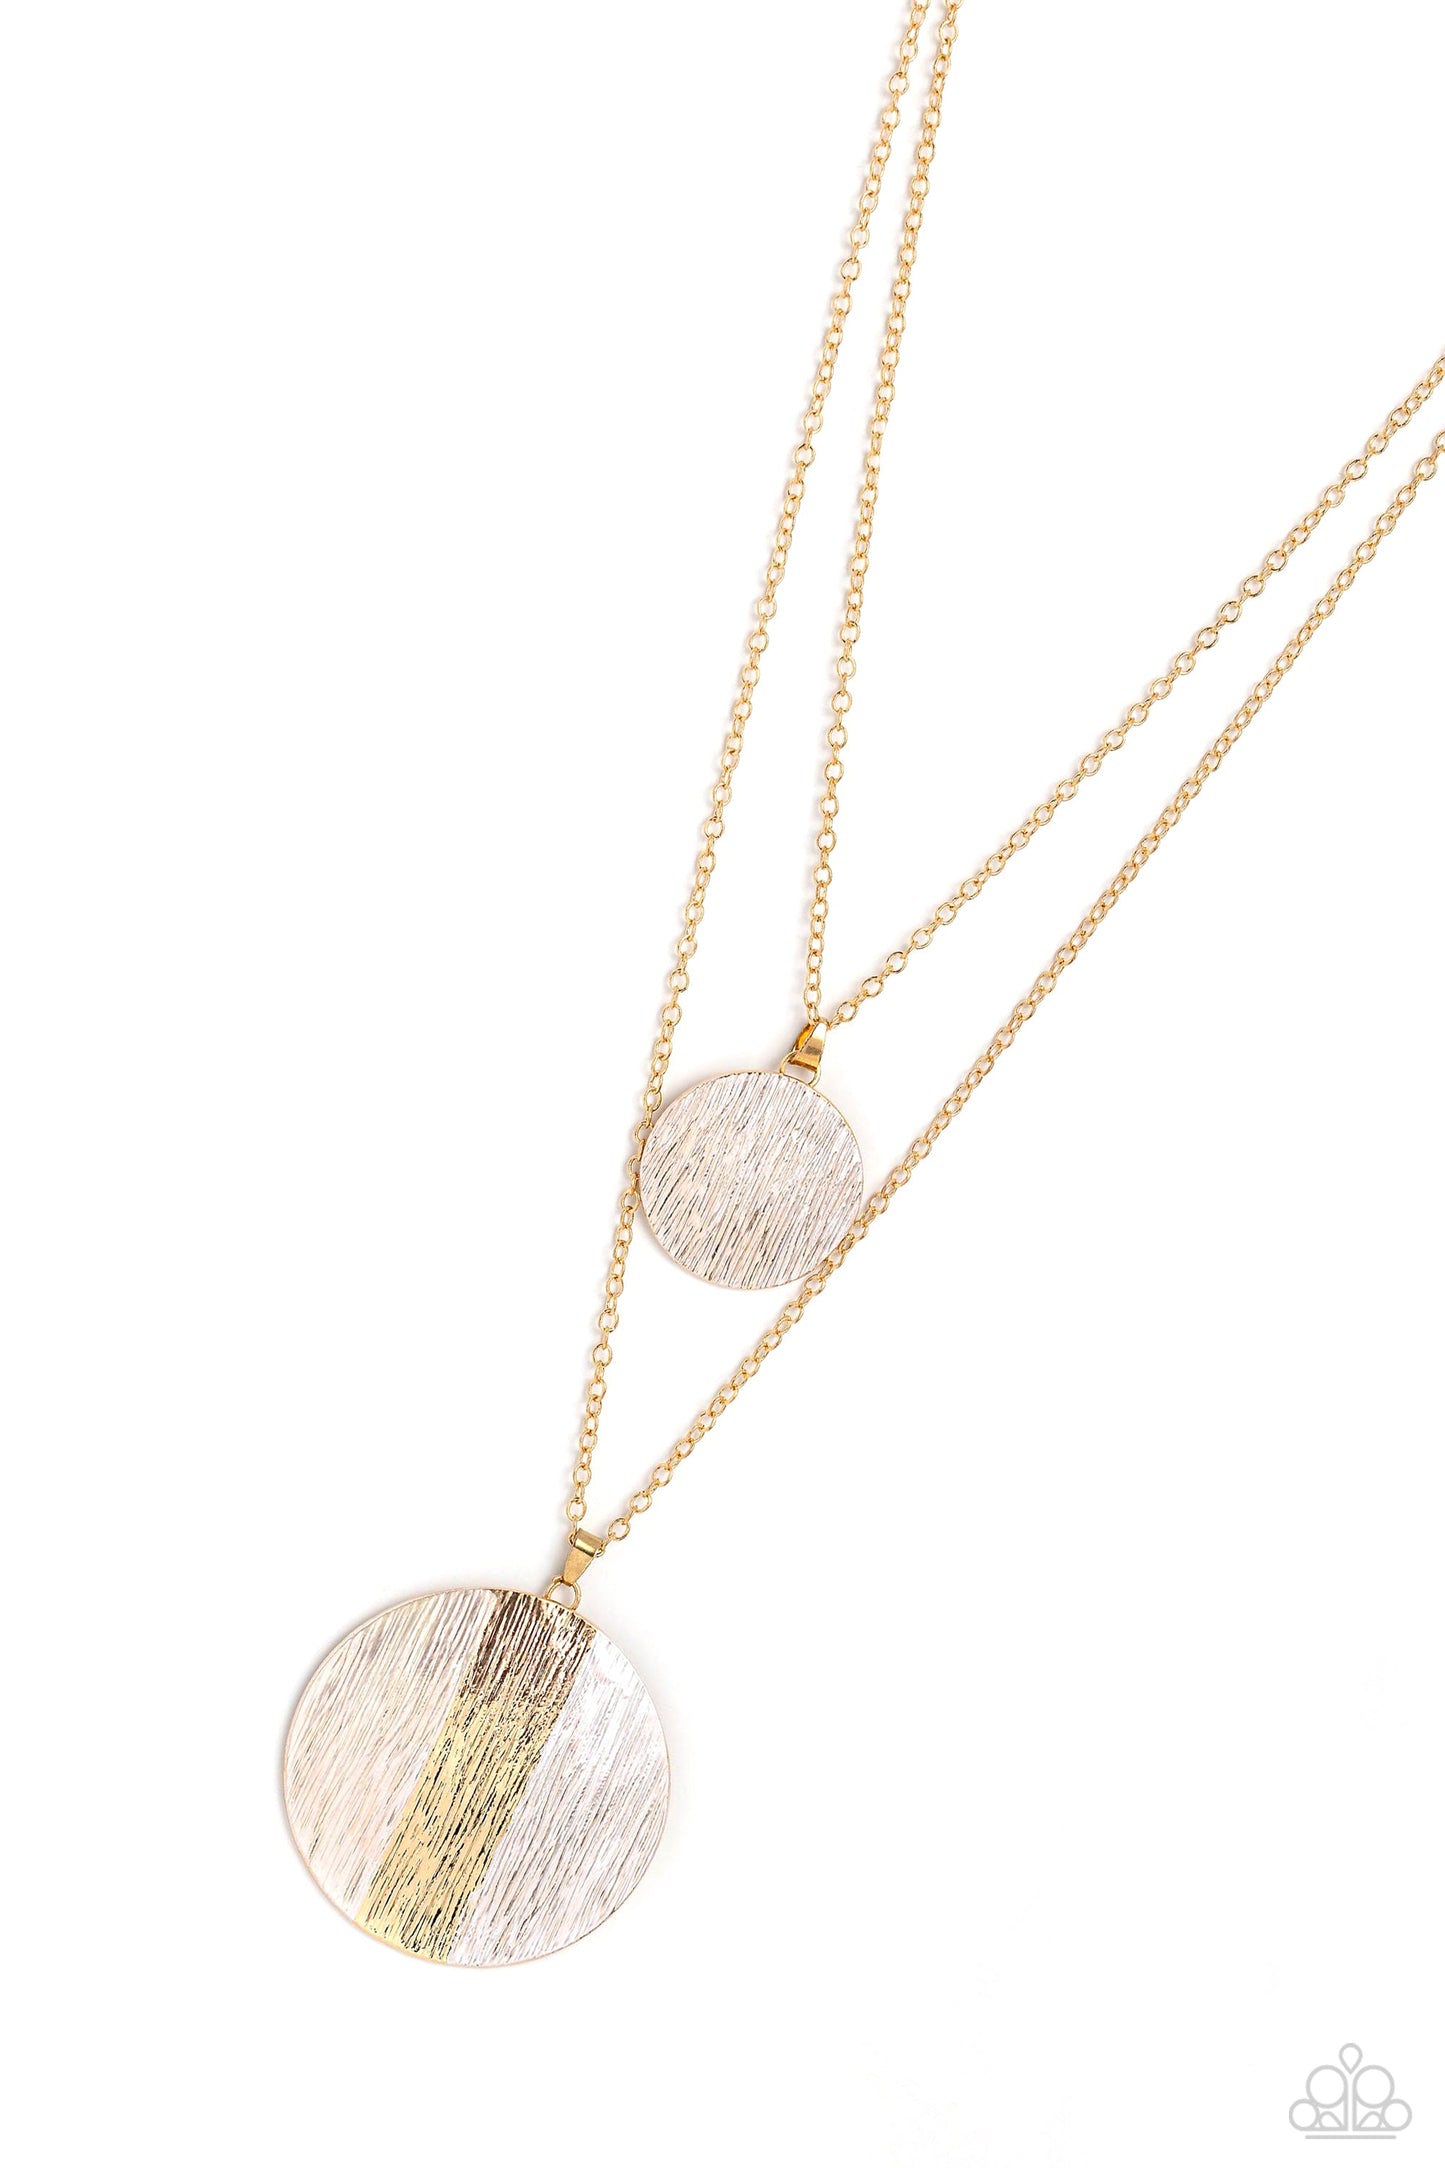 Striped Style - White Painted Gold Disc Pendant Paparazzi Necklace & matching earrings